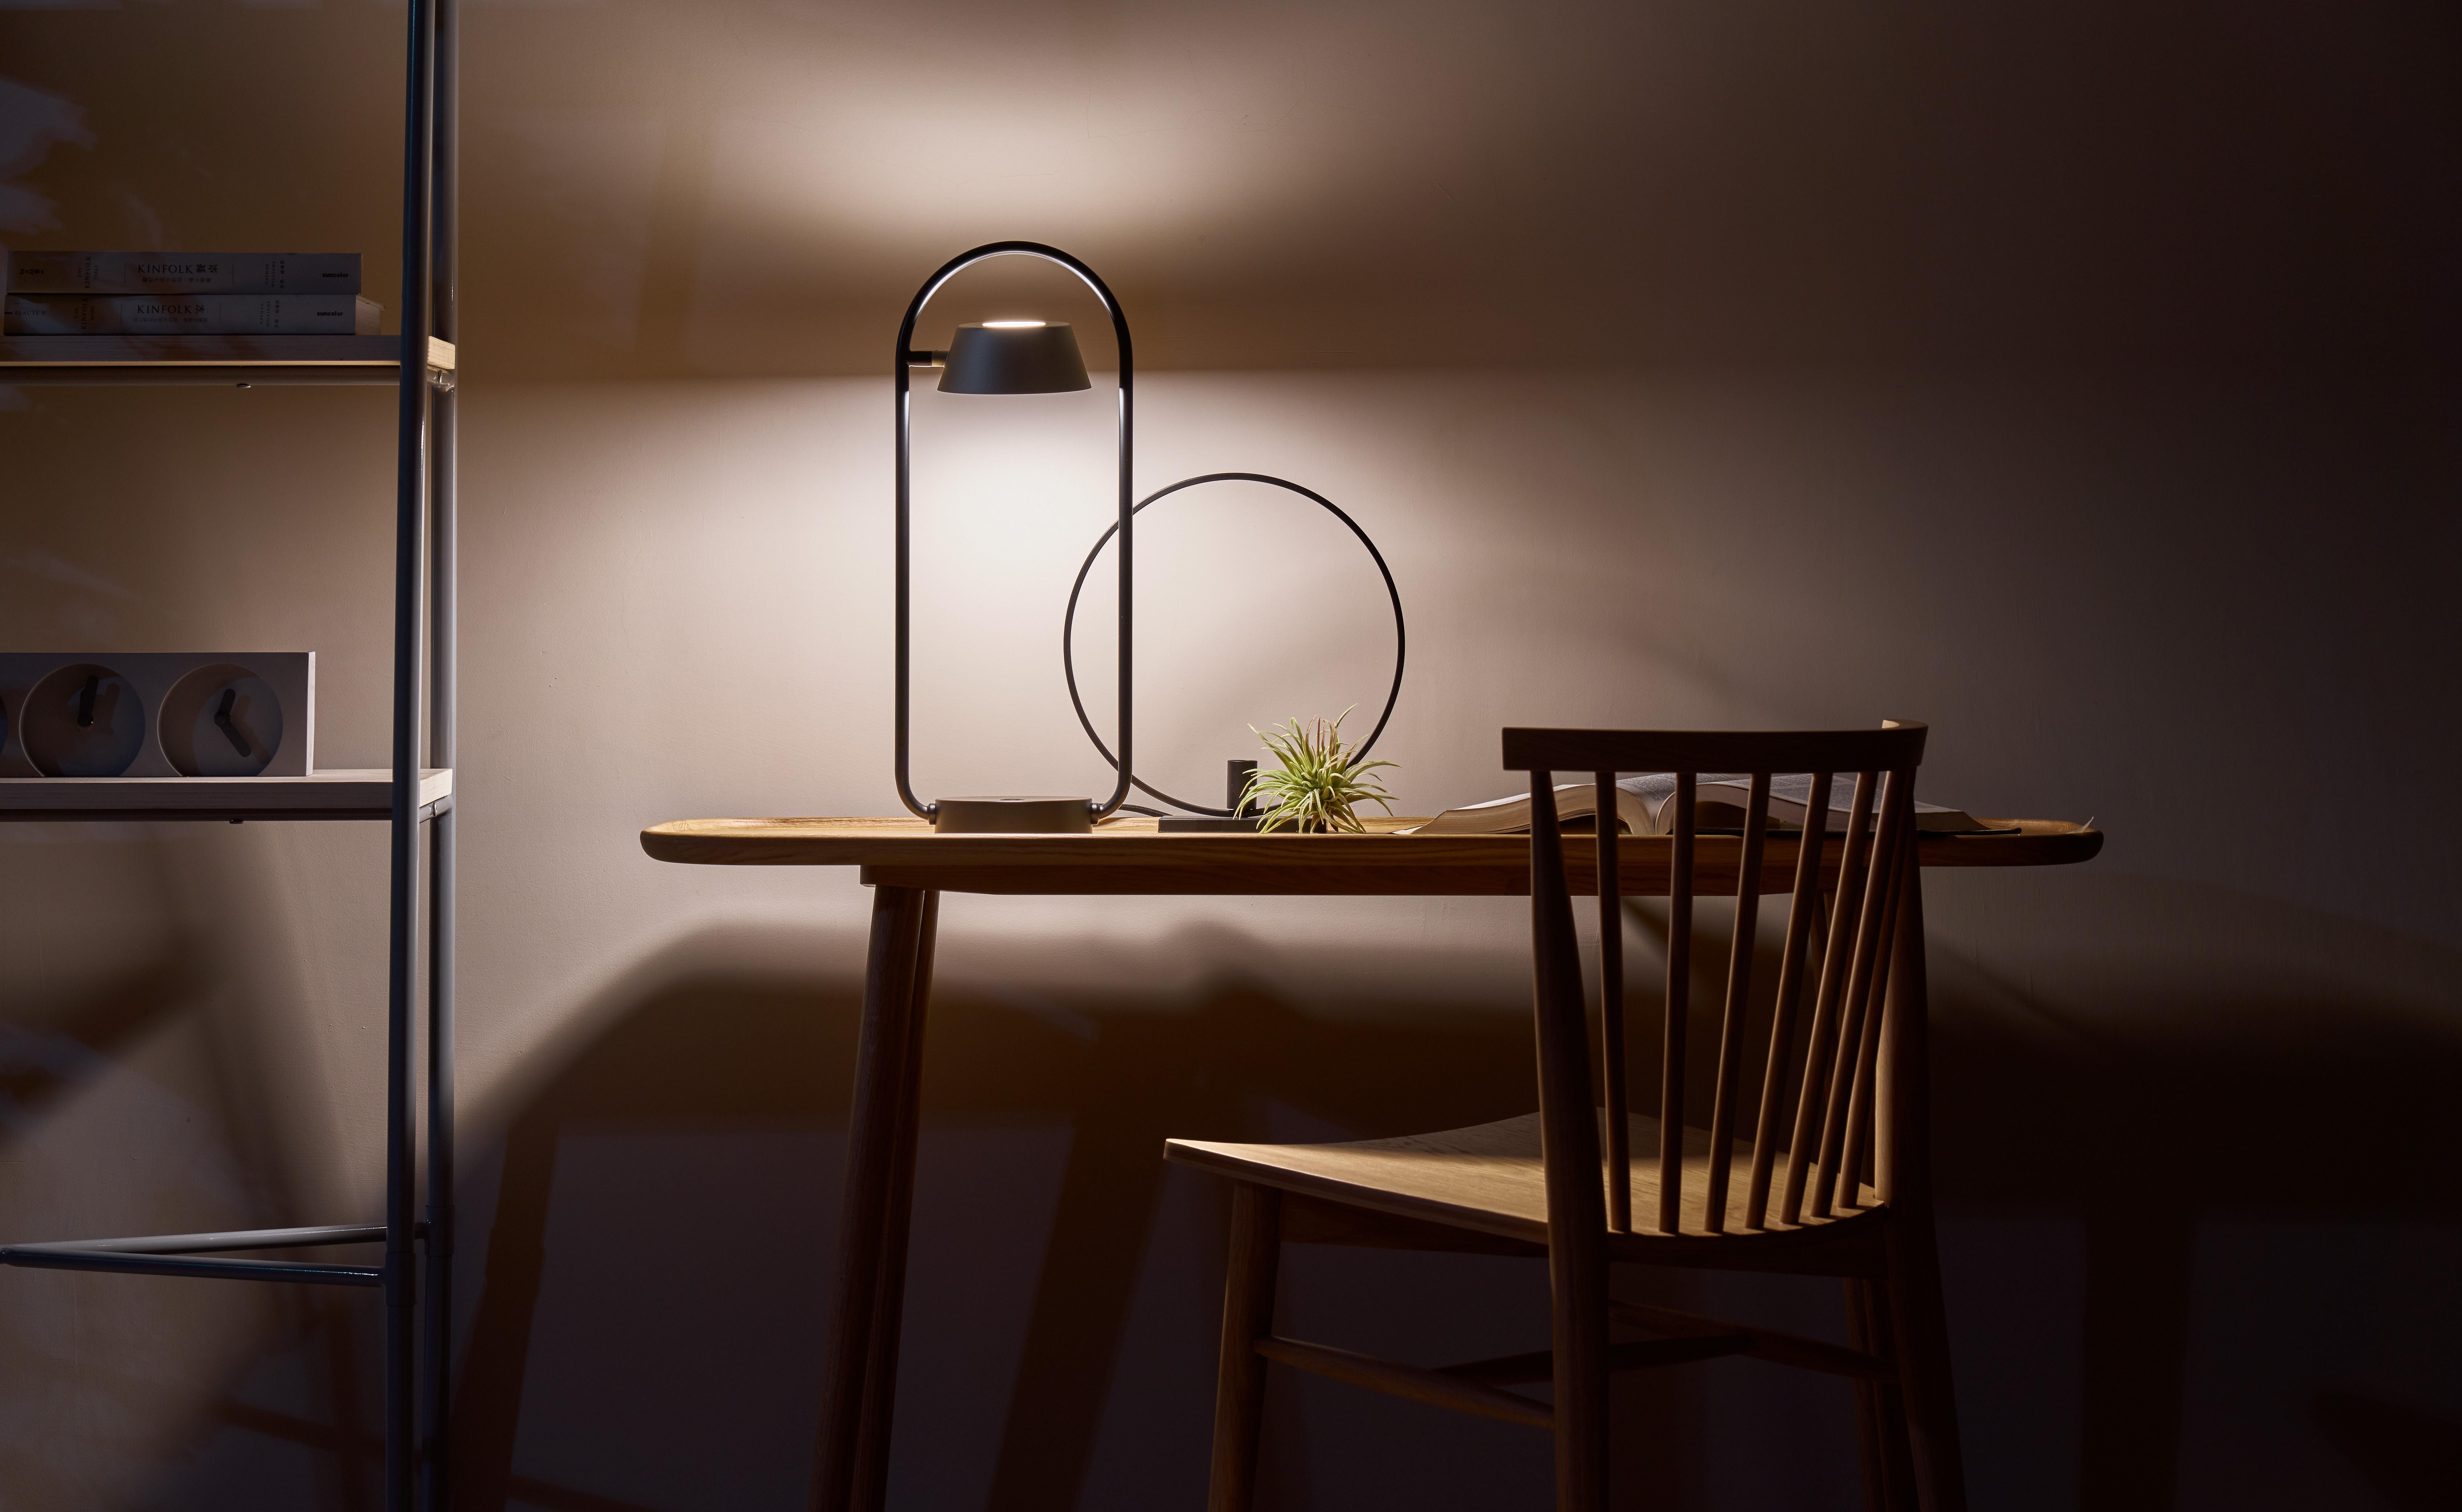 OLO Ring Table lamp offers a simple loop design consistent with rest of the OLO series. The OLO Ring Table lamp is equipped with a touch dimmer control and the integrated LED lamp shade offers rotation up to 290 degrees. The lamp can accentuate any